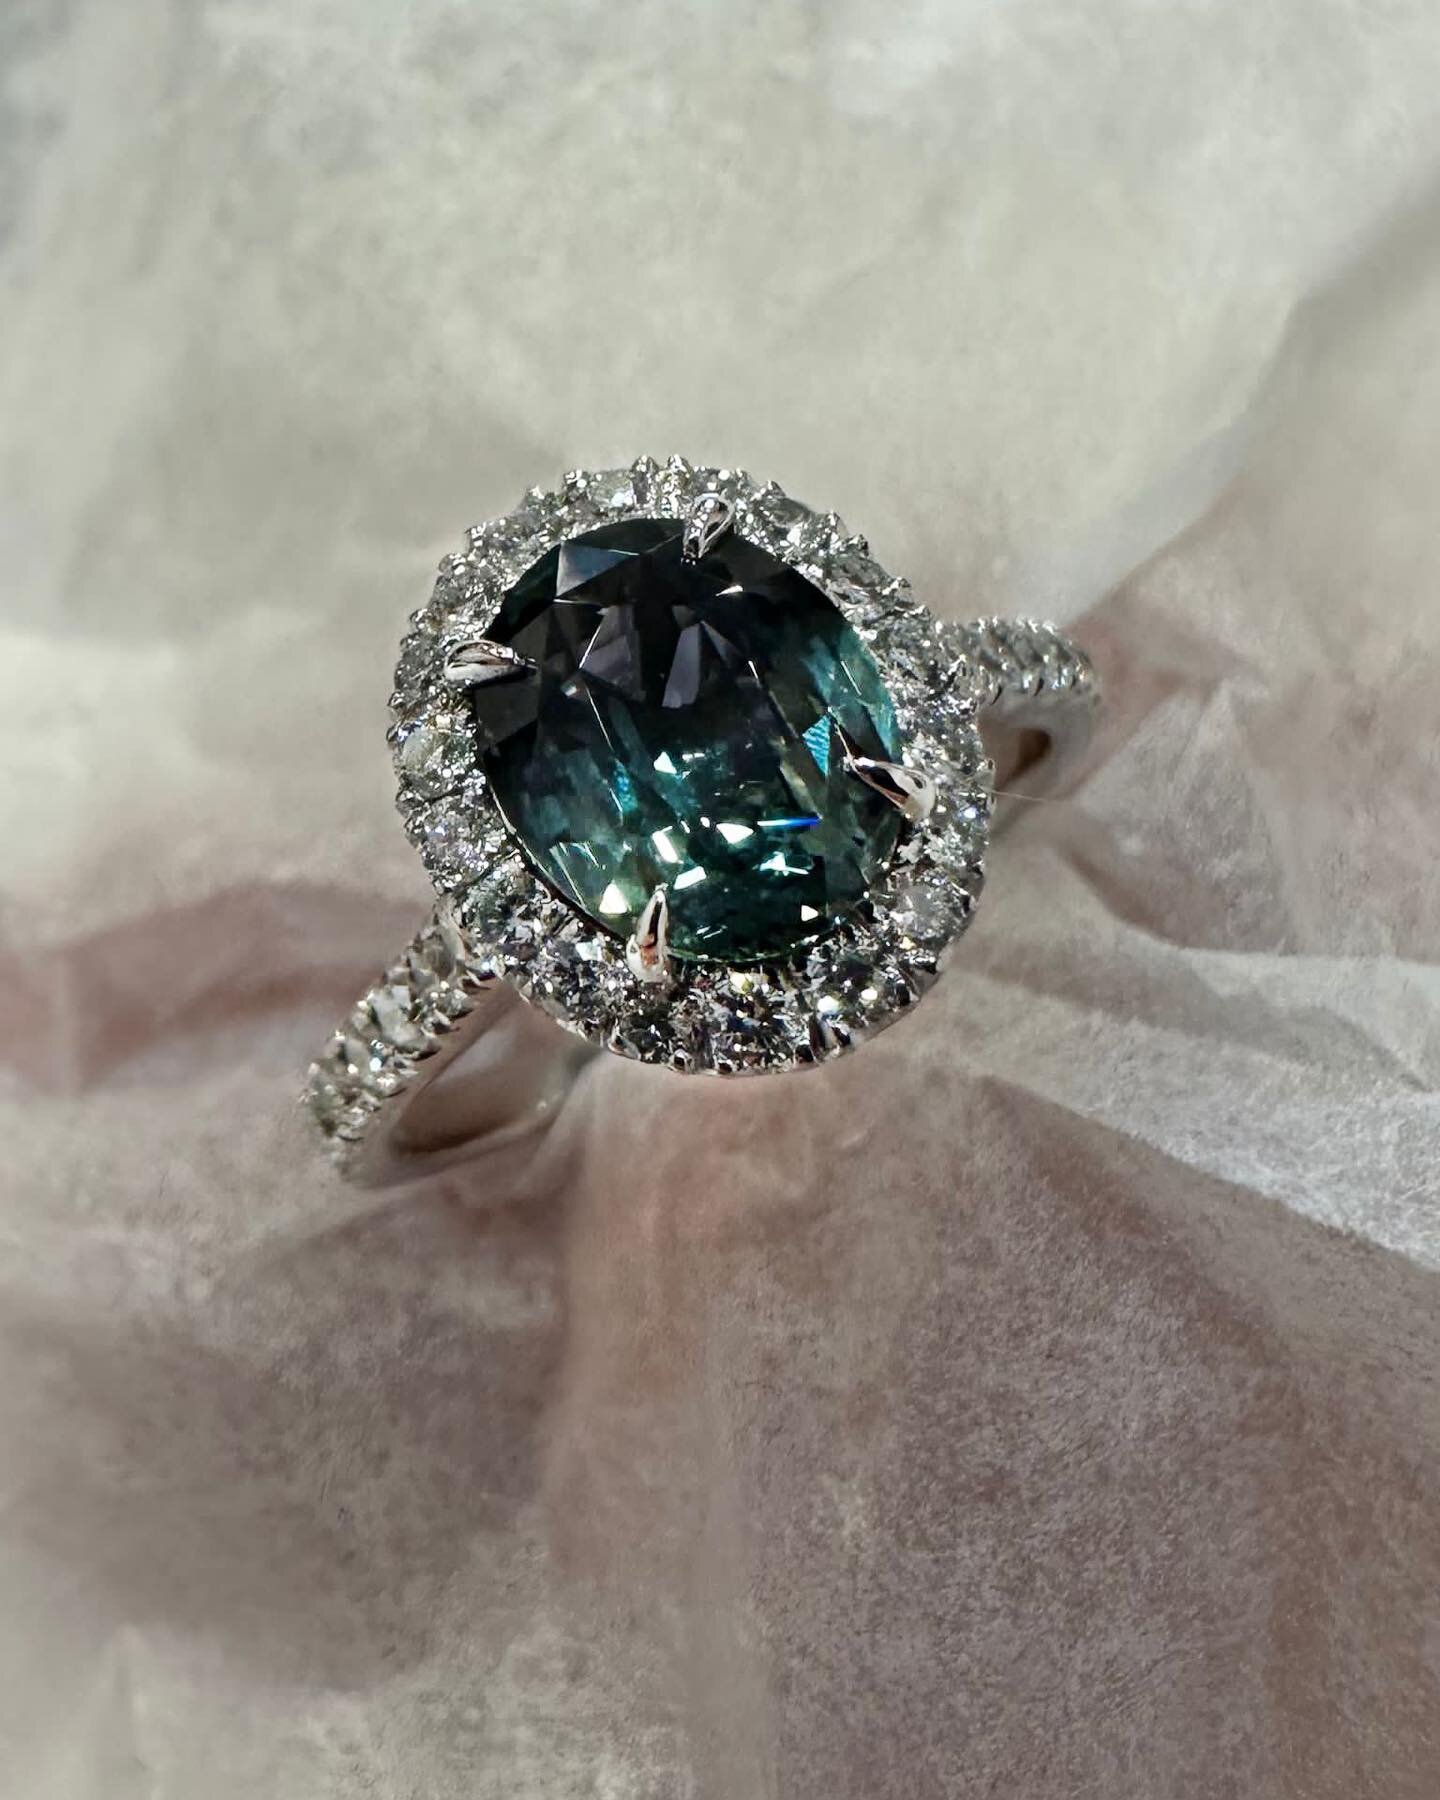 For Alix 〰️ an oval cut teal sapphire in a halo of round brilliant cut diamonds in white gold. The colour of this stone has stayed with us ever since the creation, a truly rare beauty 💫

#emmaclarksonwebb #jewellerydesigner #tealsapphire